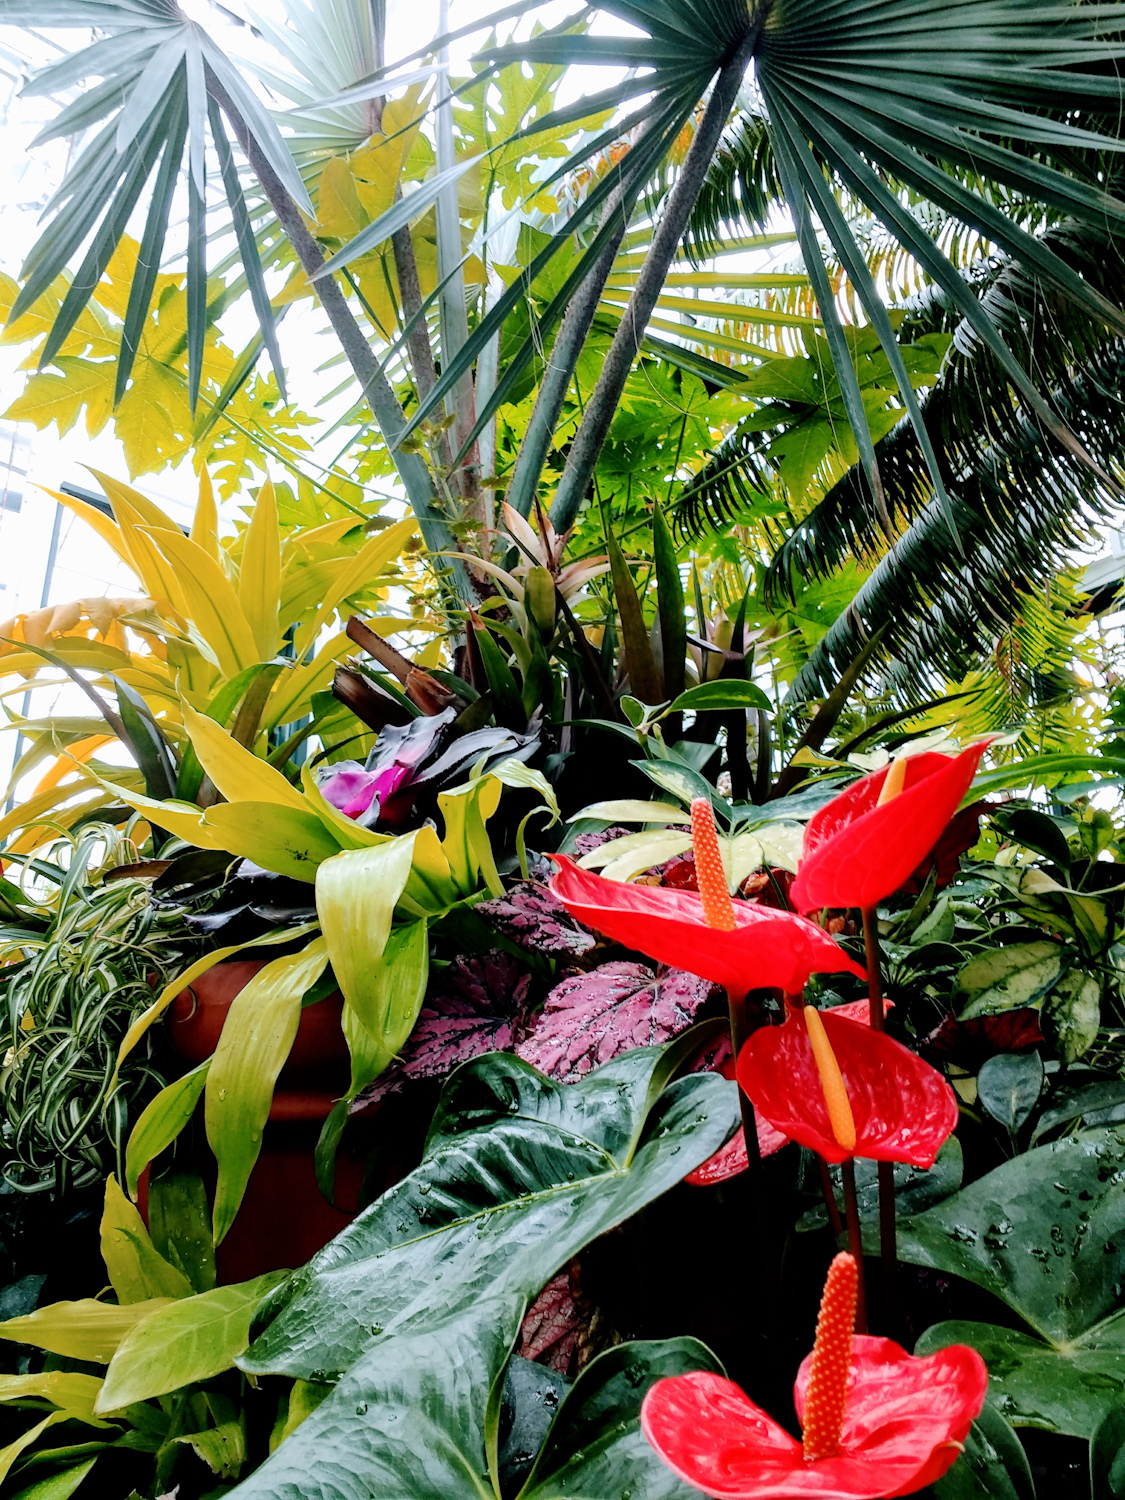 Anthuriums and palms inside Conservatory